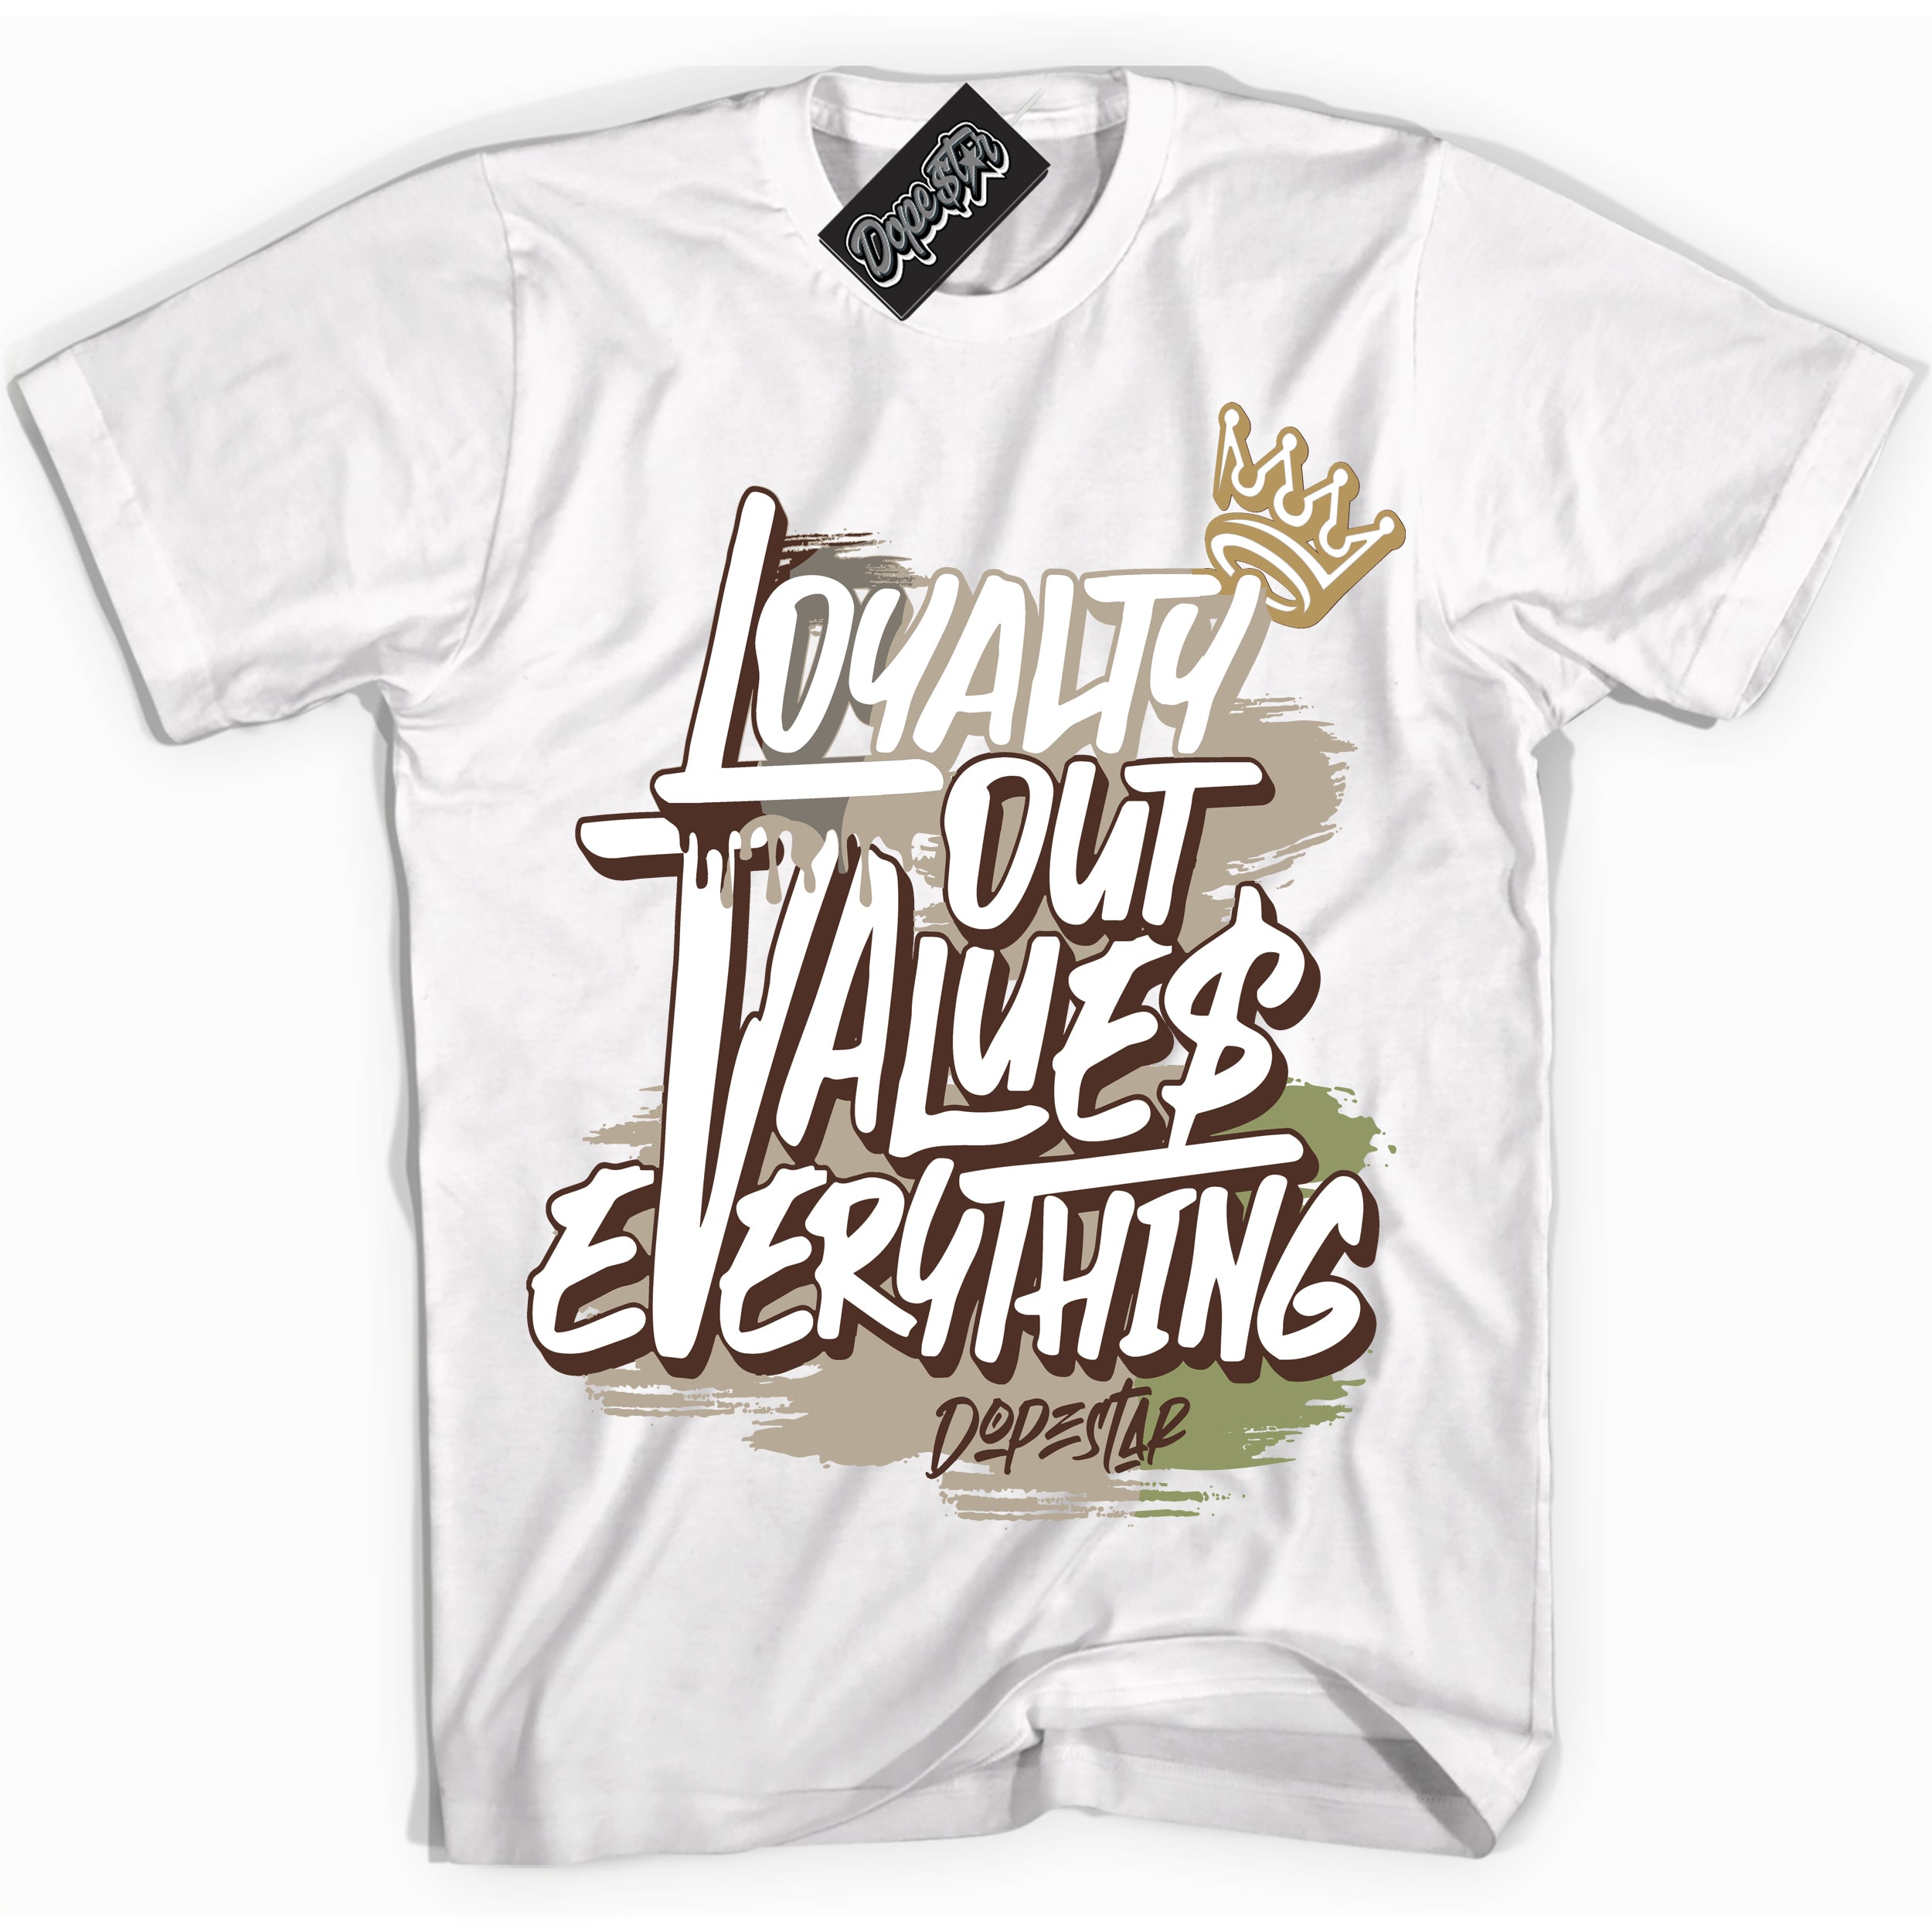 Cool White Shirt with “ Loyalty Out Values Everything” design that perfectly matches Zion Williamson Voodoo 1s Sneakers.